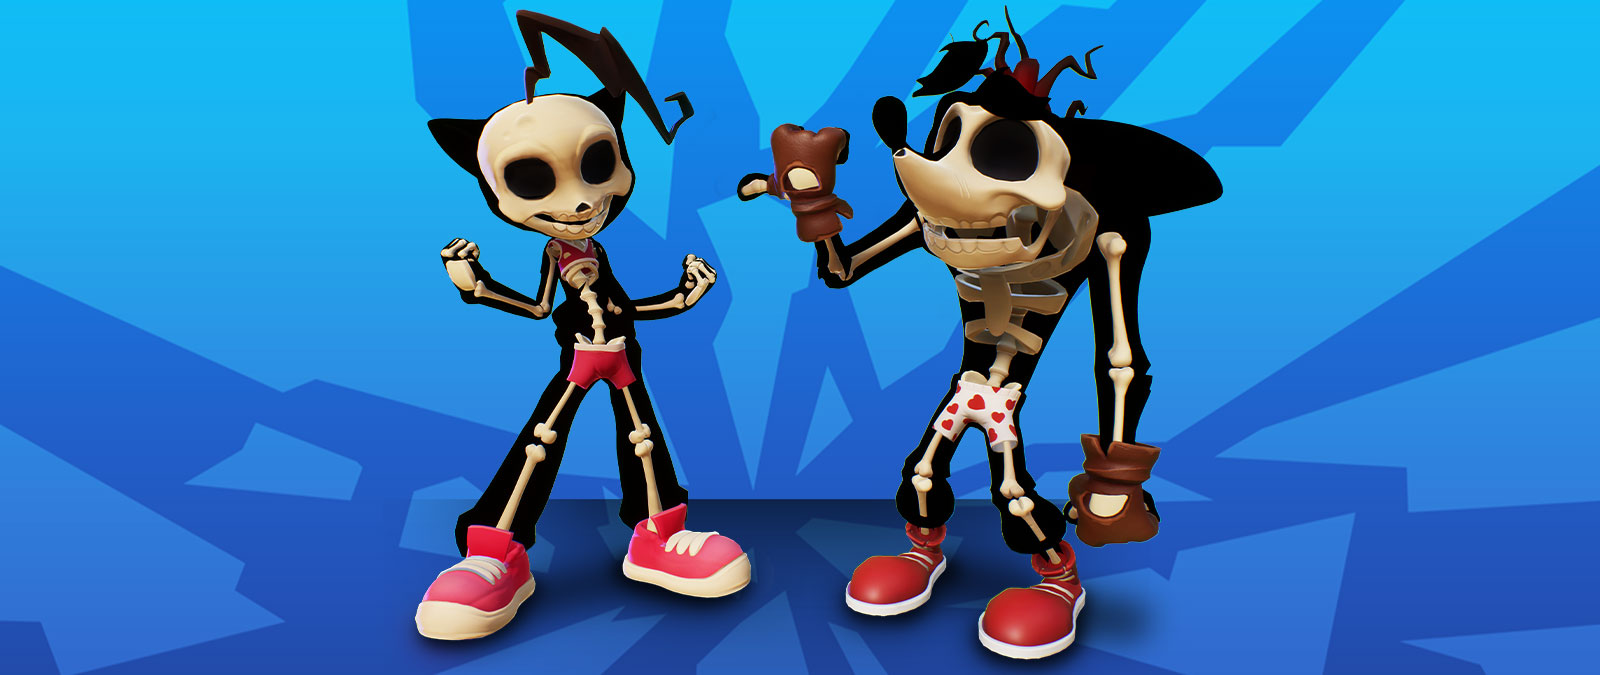 Crash and Coco’s skeletons with underwear on.